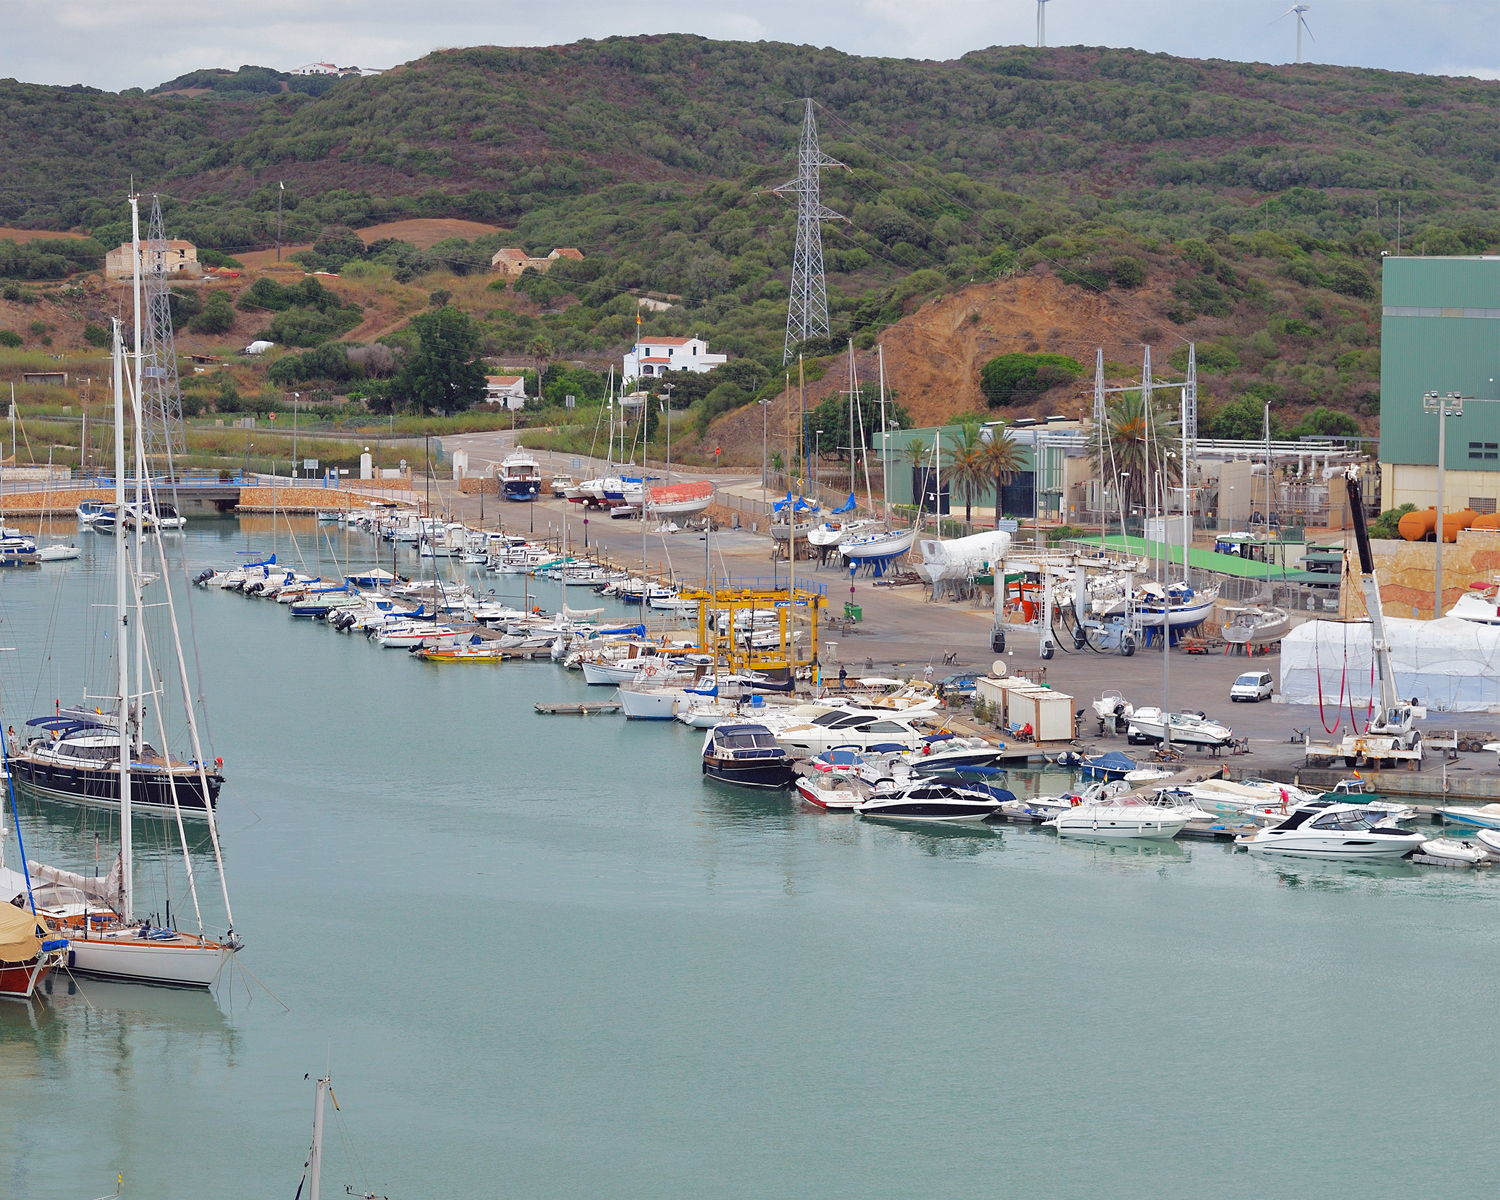 The tender for the dry dock at the Port of Maó is not awarded